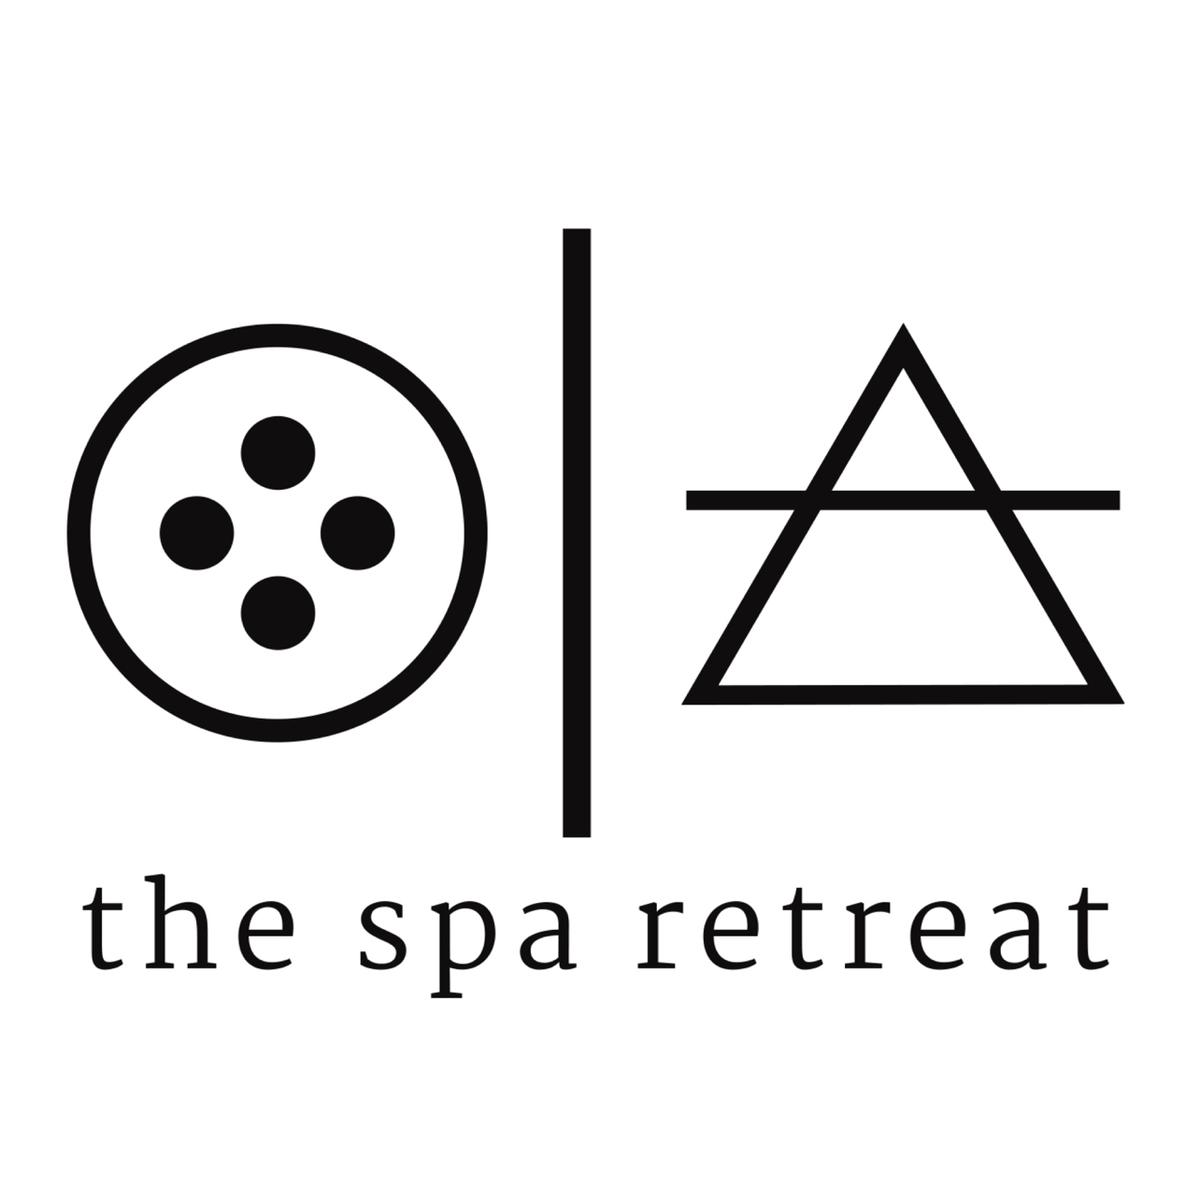 The Spa Retreat's images